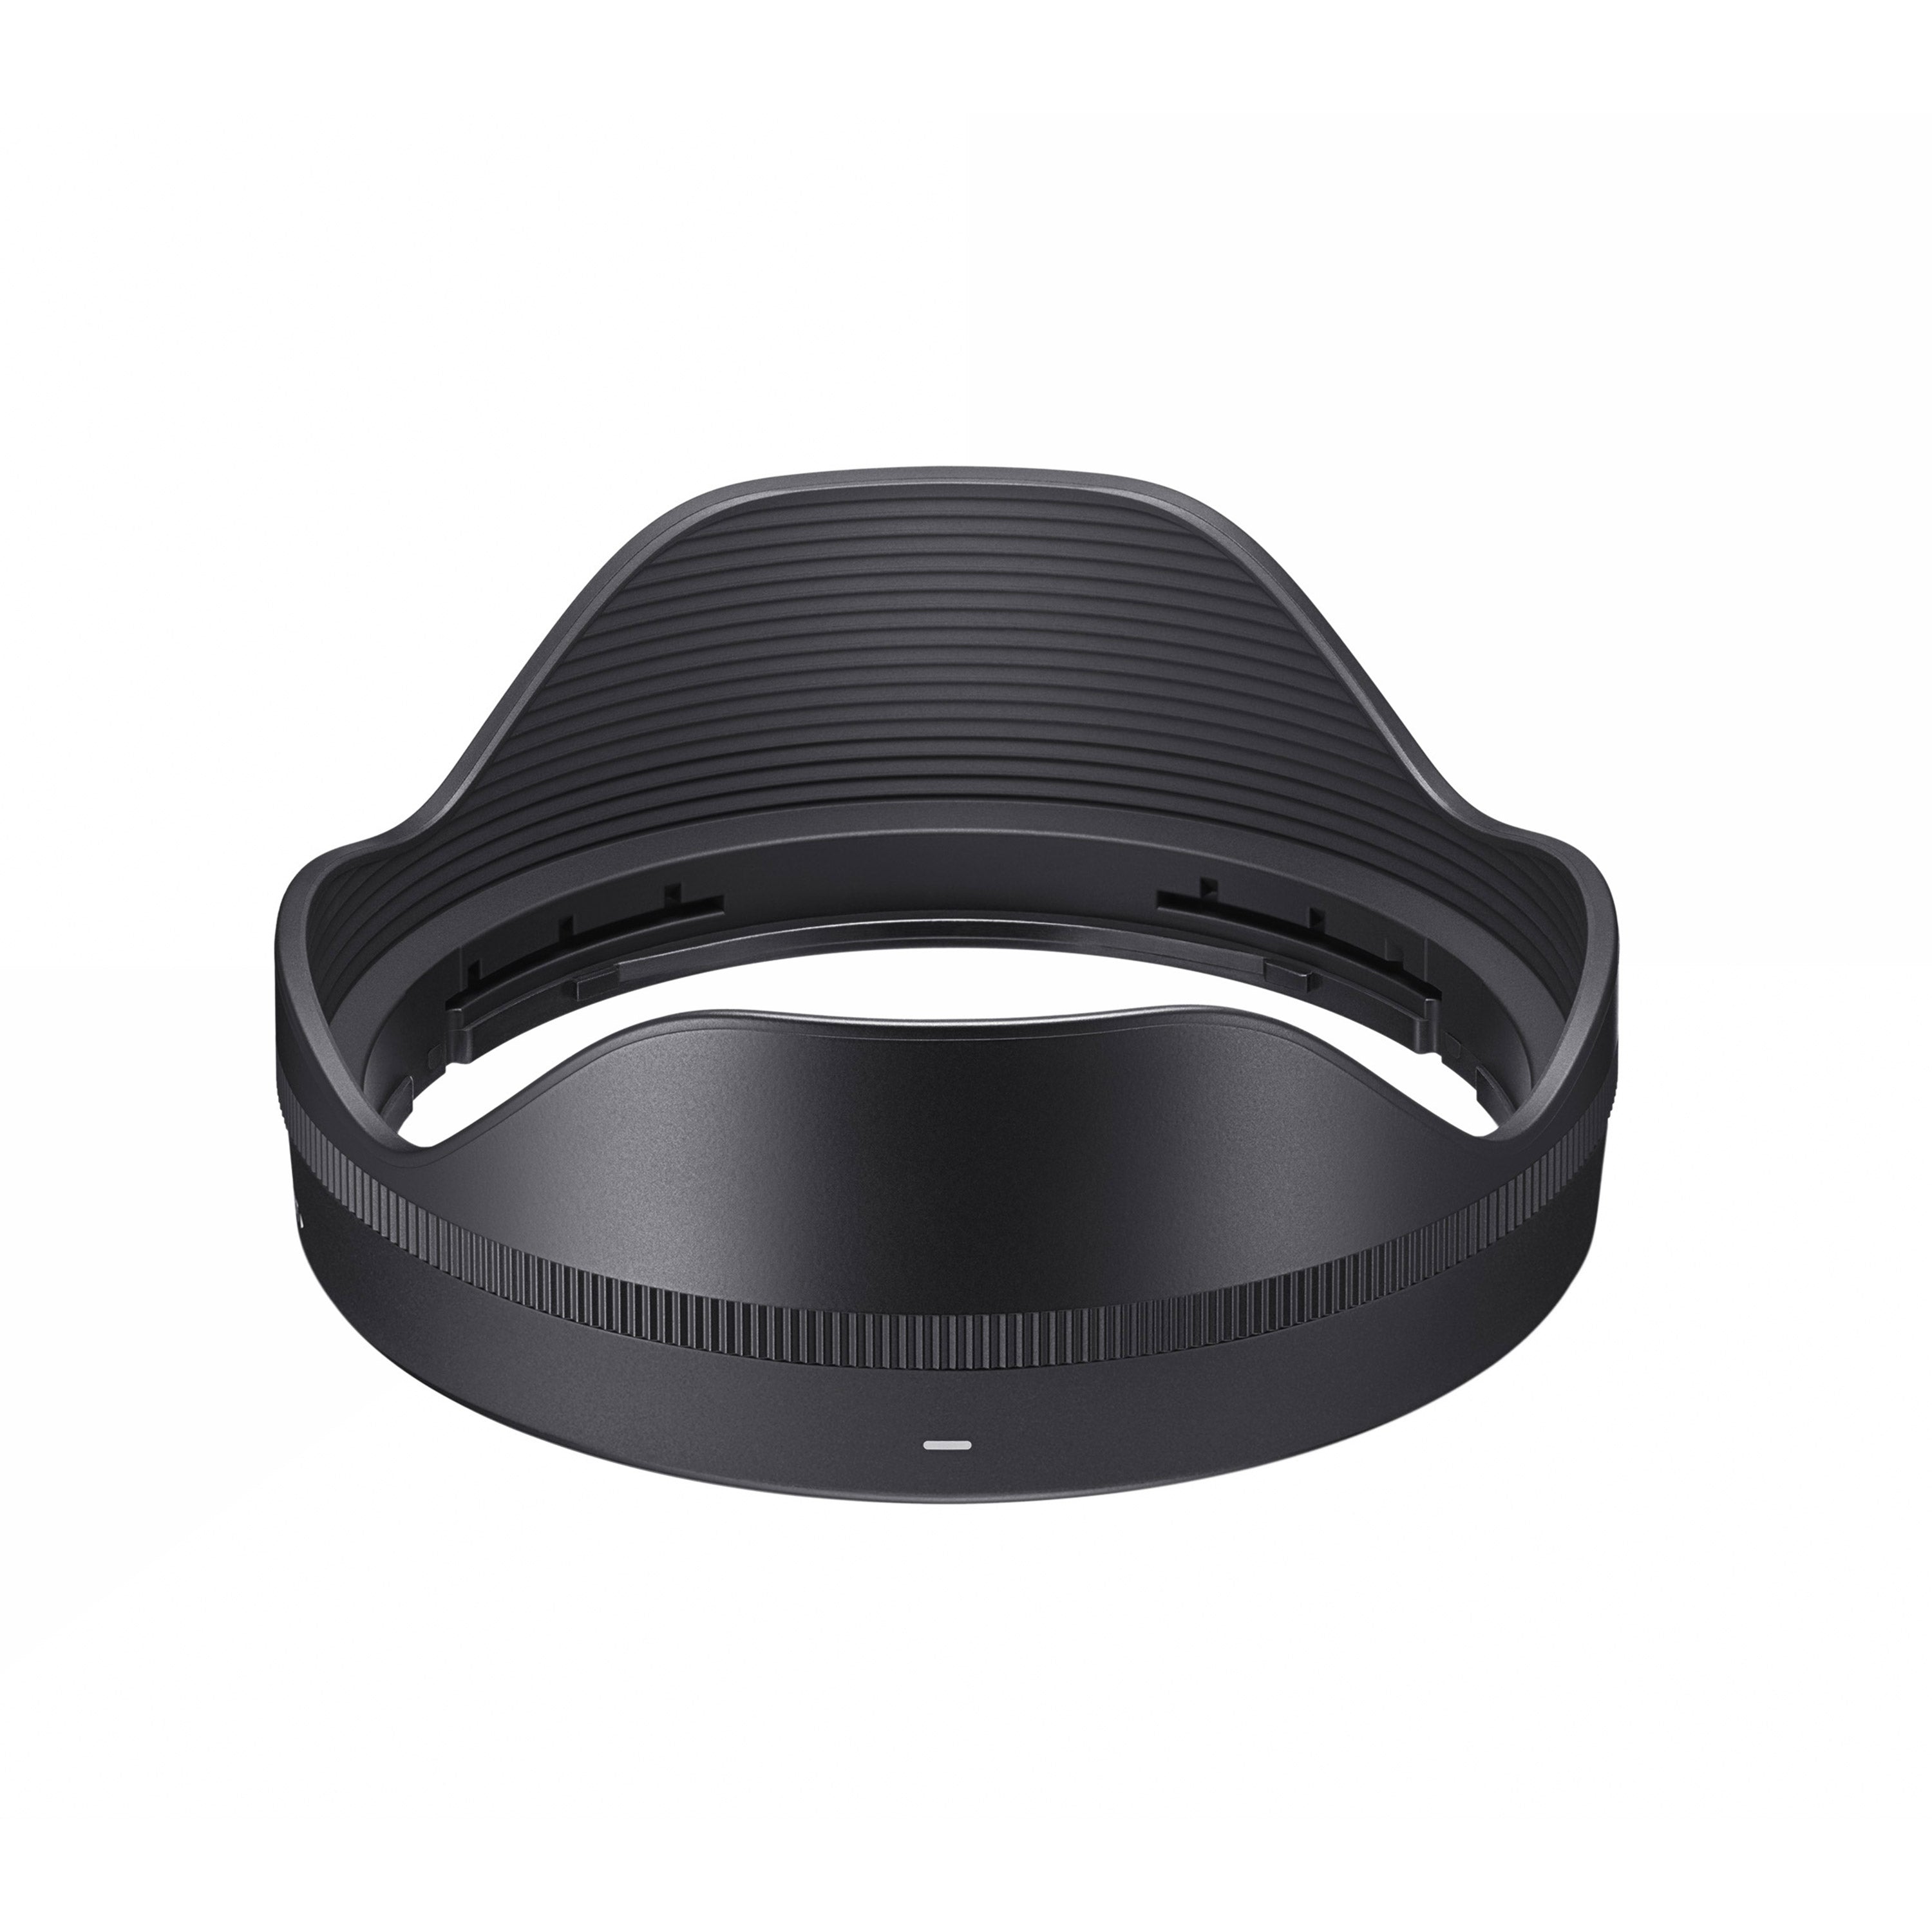 Lens Hood LH756-01 for 16-28mm F2.8 DG DN | Contemporary